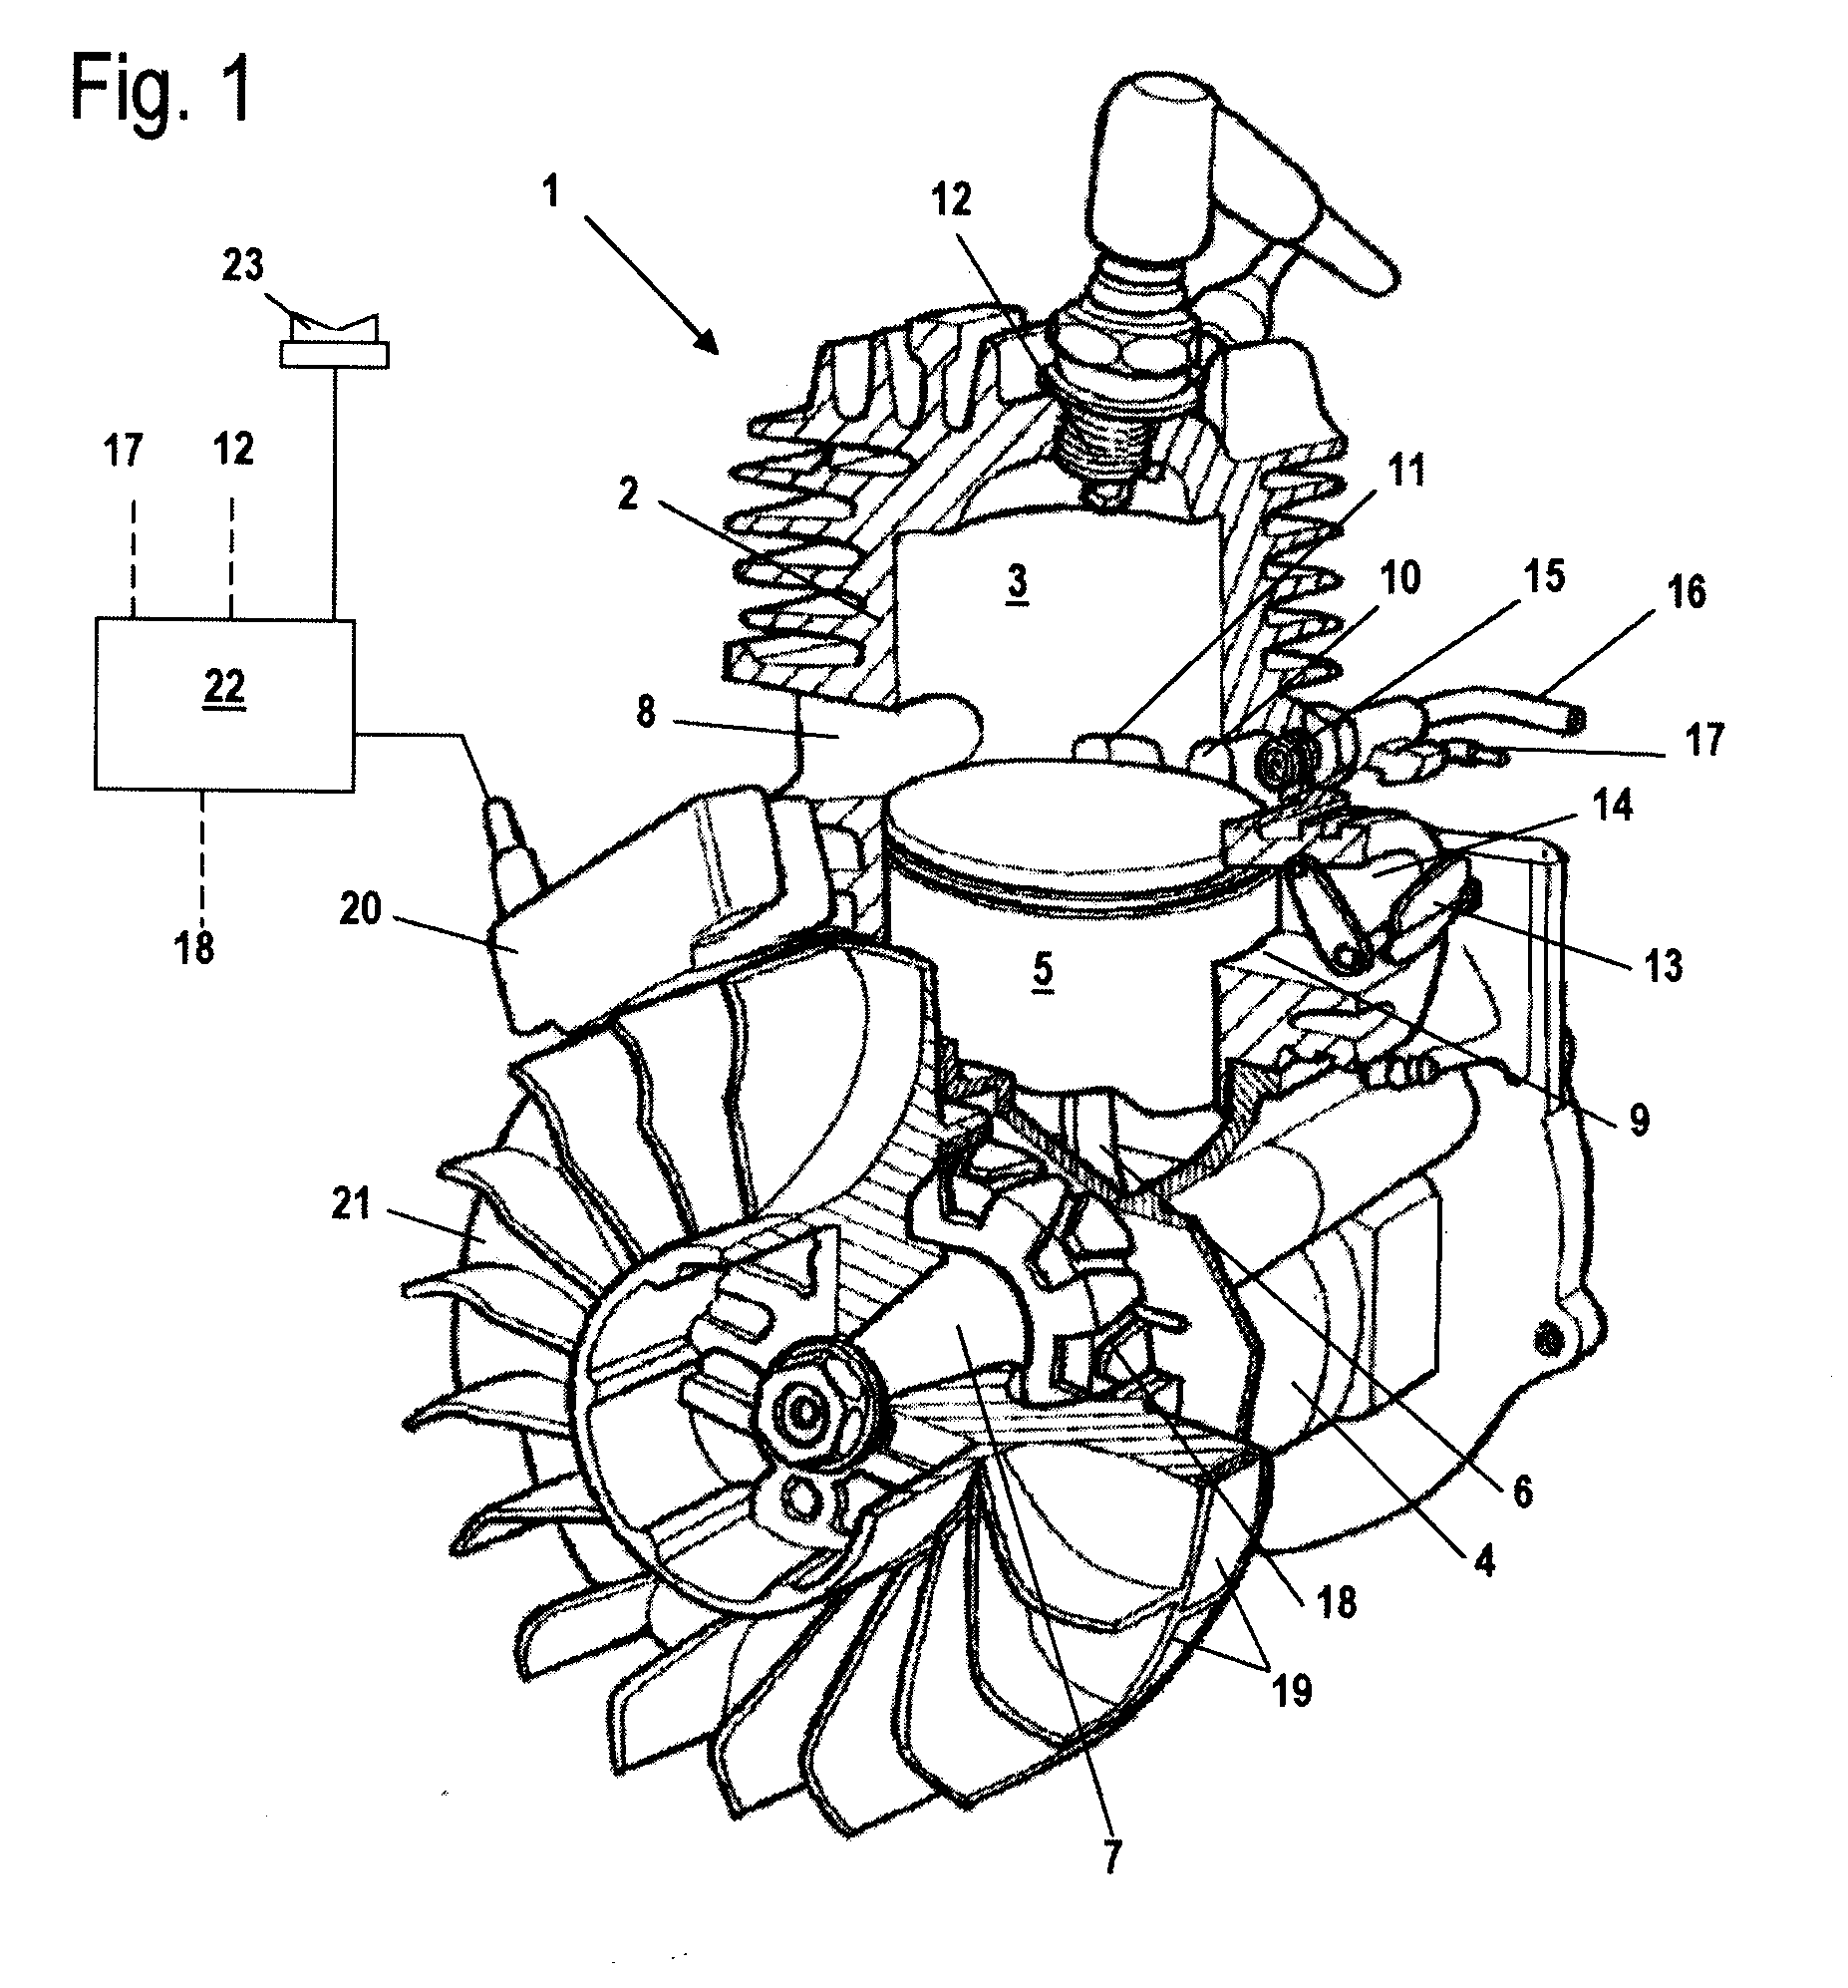 Method for Operating a Two-Stroke Engine